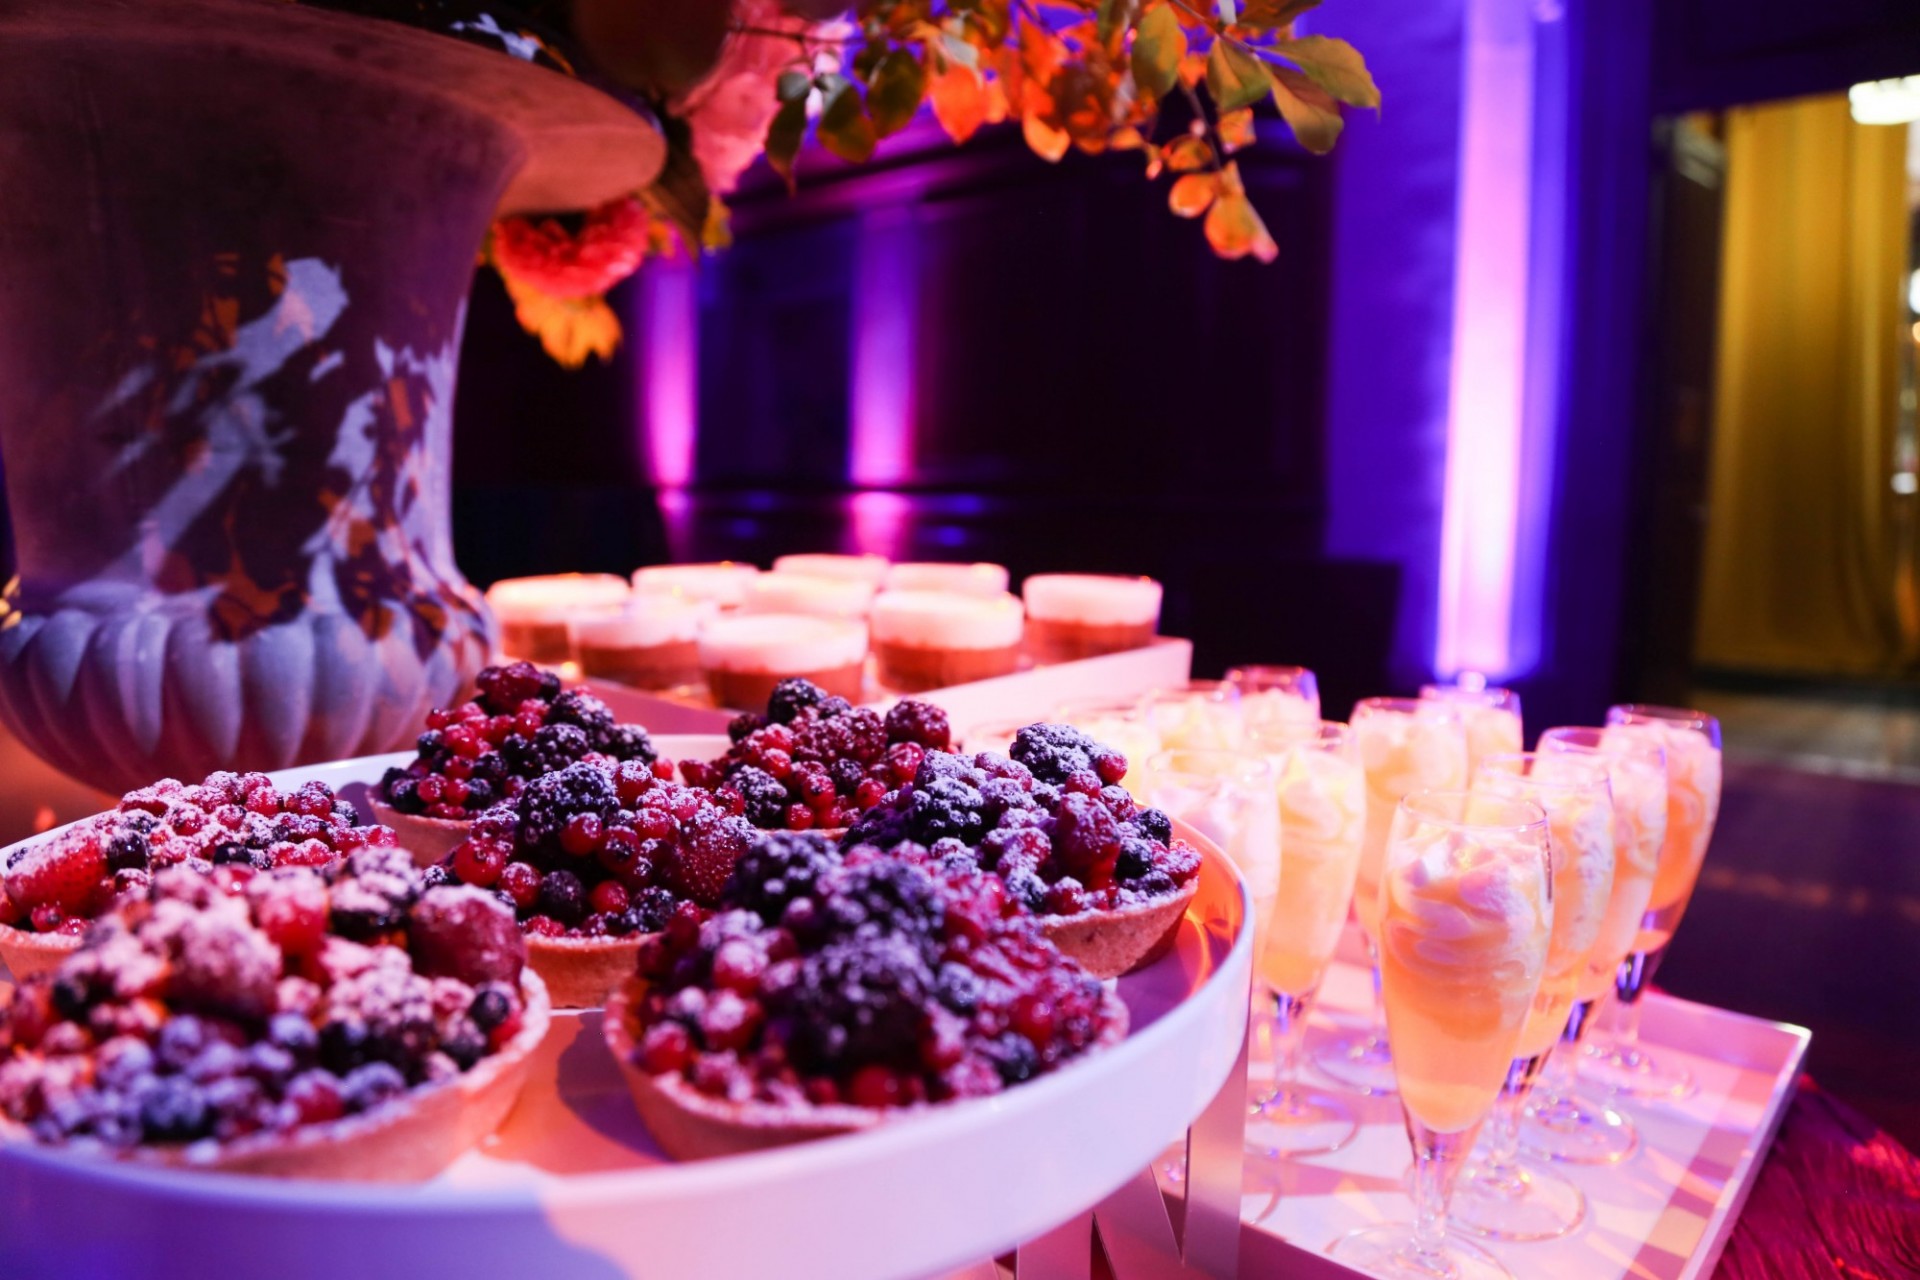 Berry tarts are set next to cocktails in champagne flutes